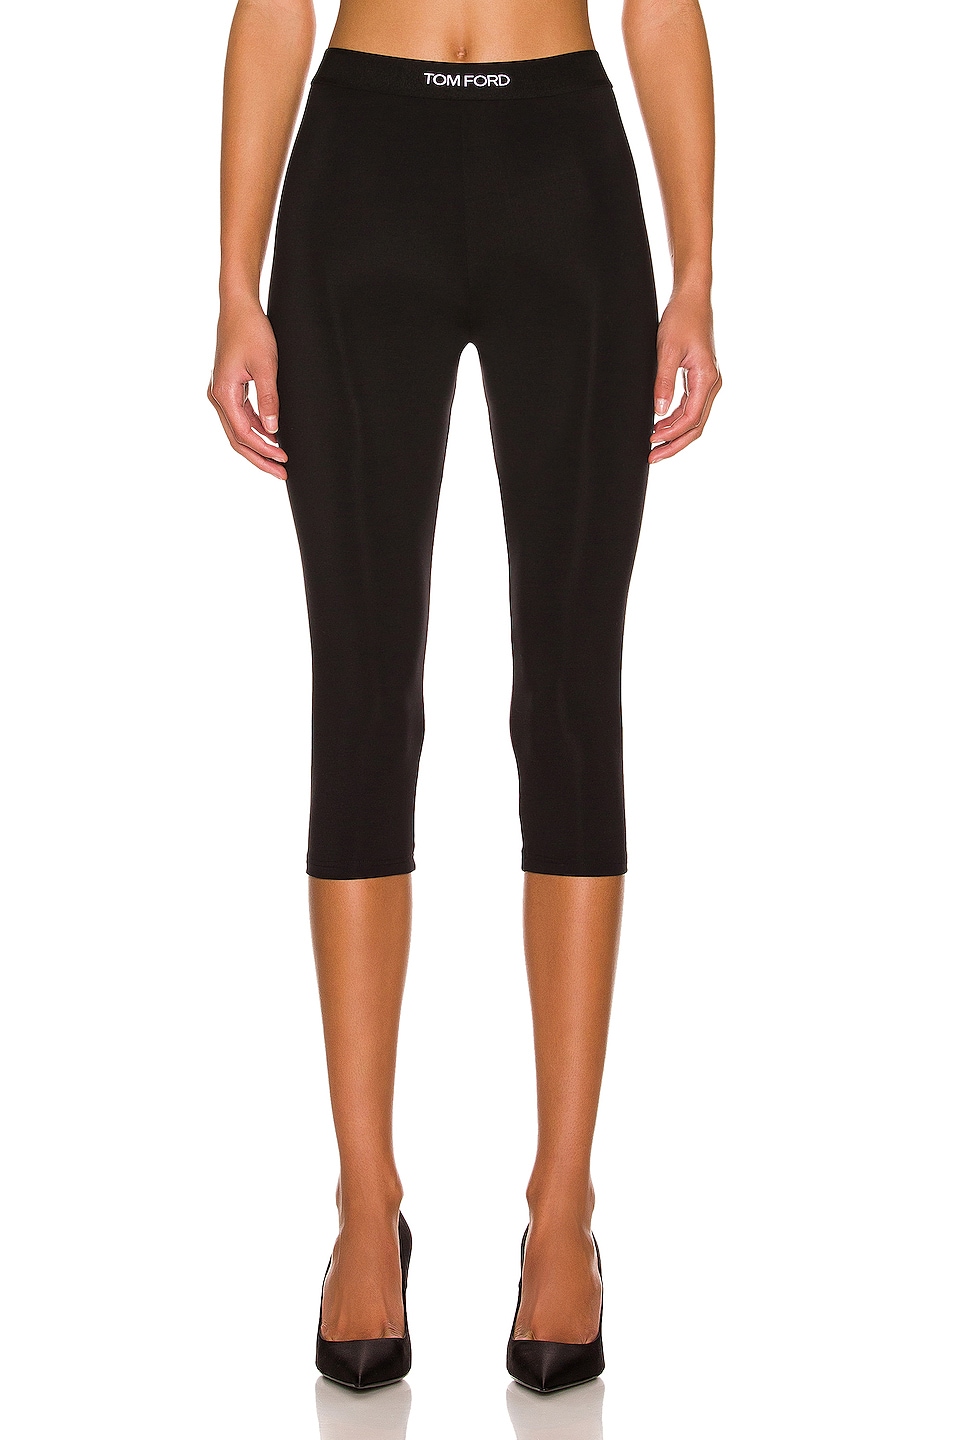 Image 1 of TOM FORD Signature Cropped Yoga Pant in Black